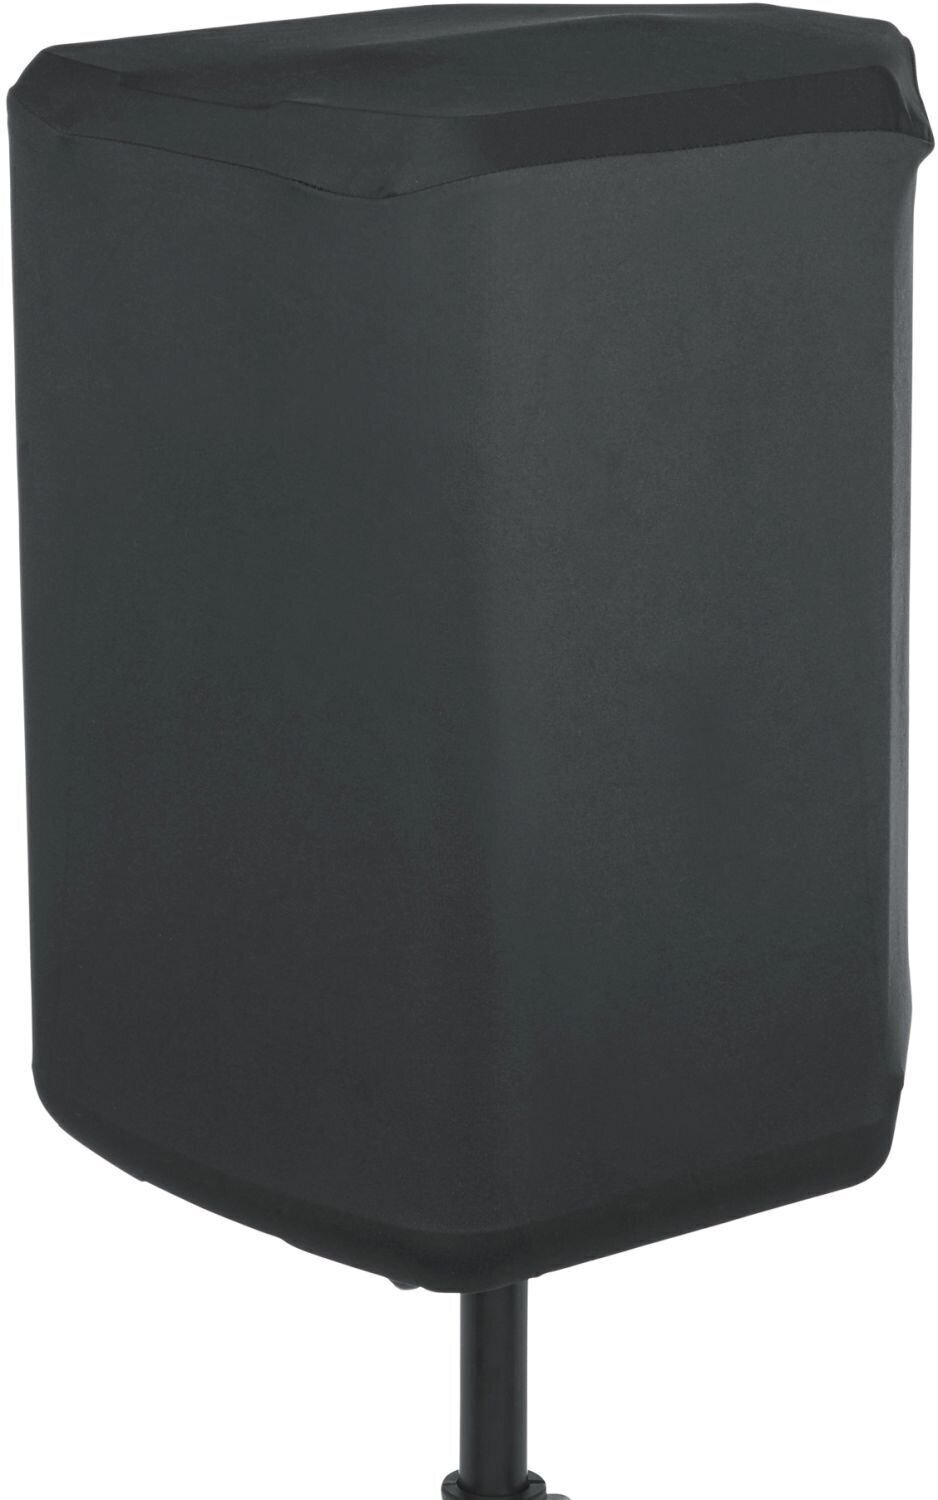 Bag for loudspeakers JBL Stretch Cover Eon One Compact Bag for loudspeakers